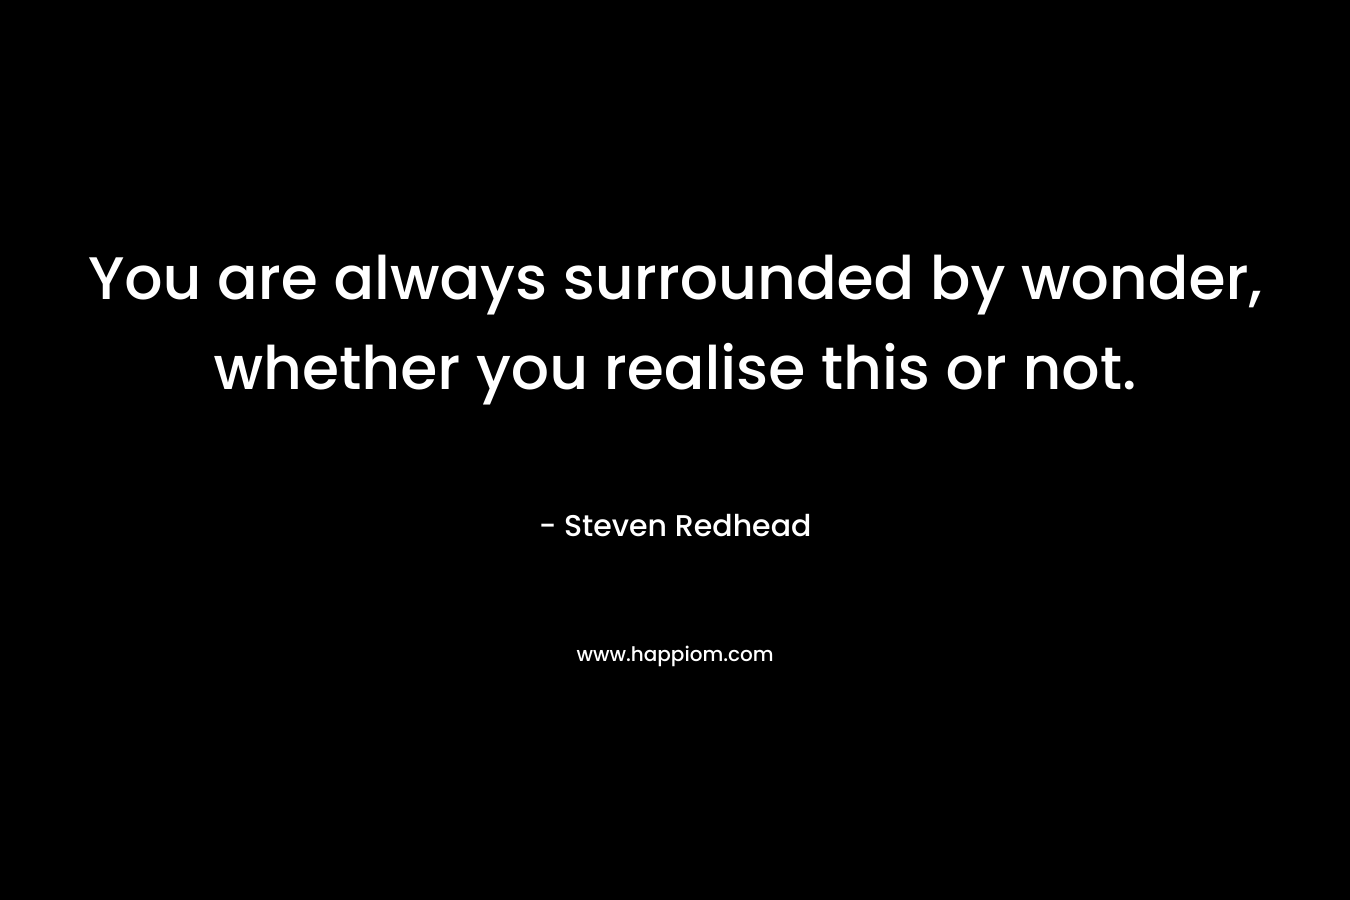 You are always surrounded by wonder, whether you realise this or not. – Steven Redhead